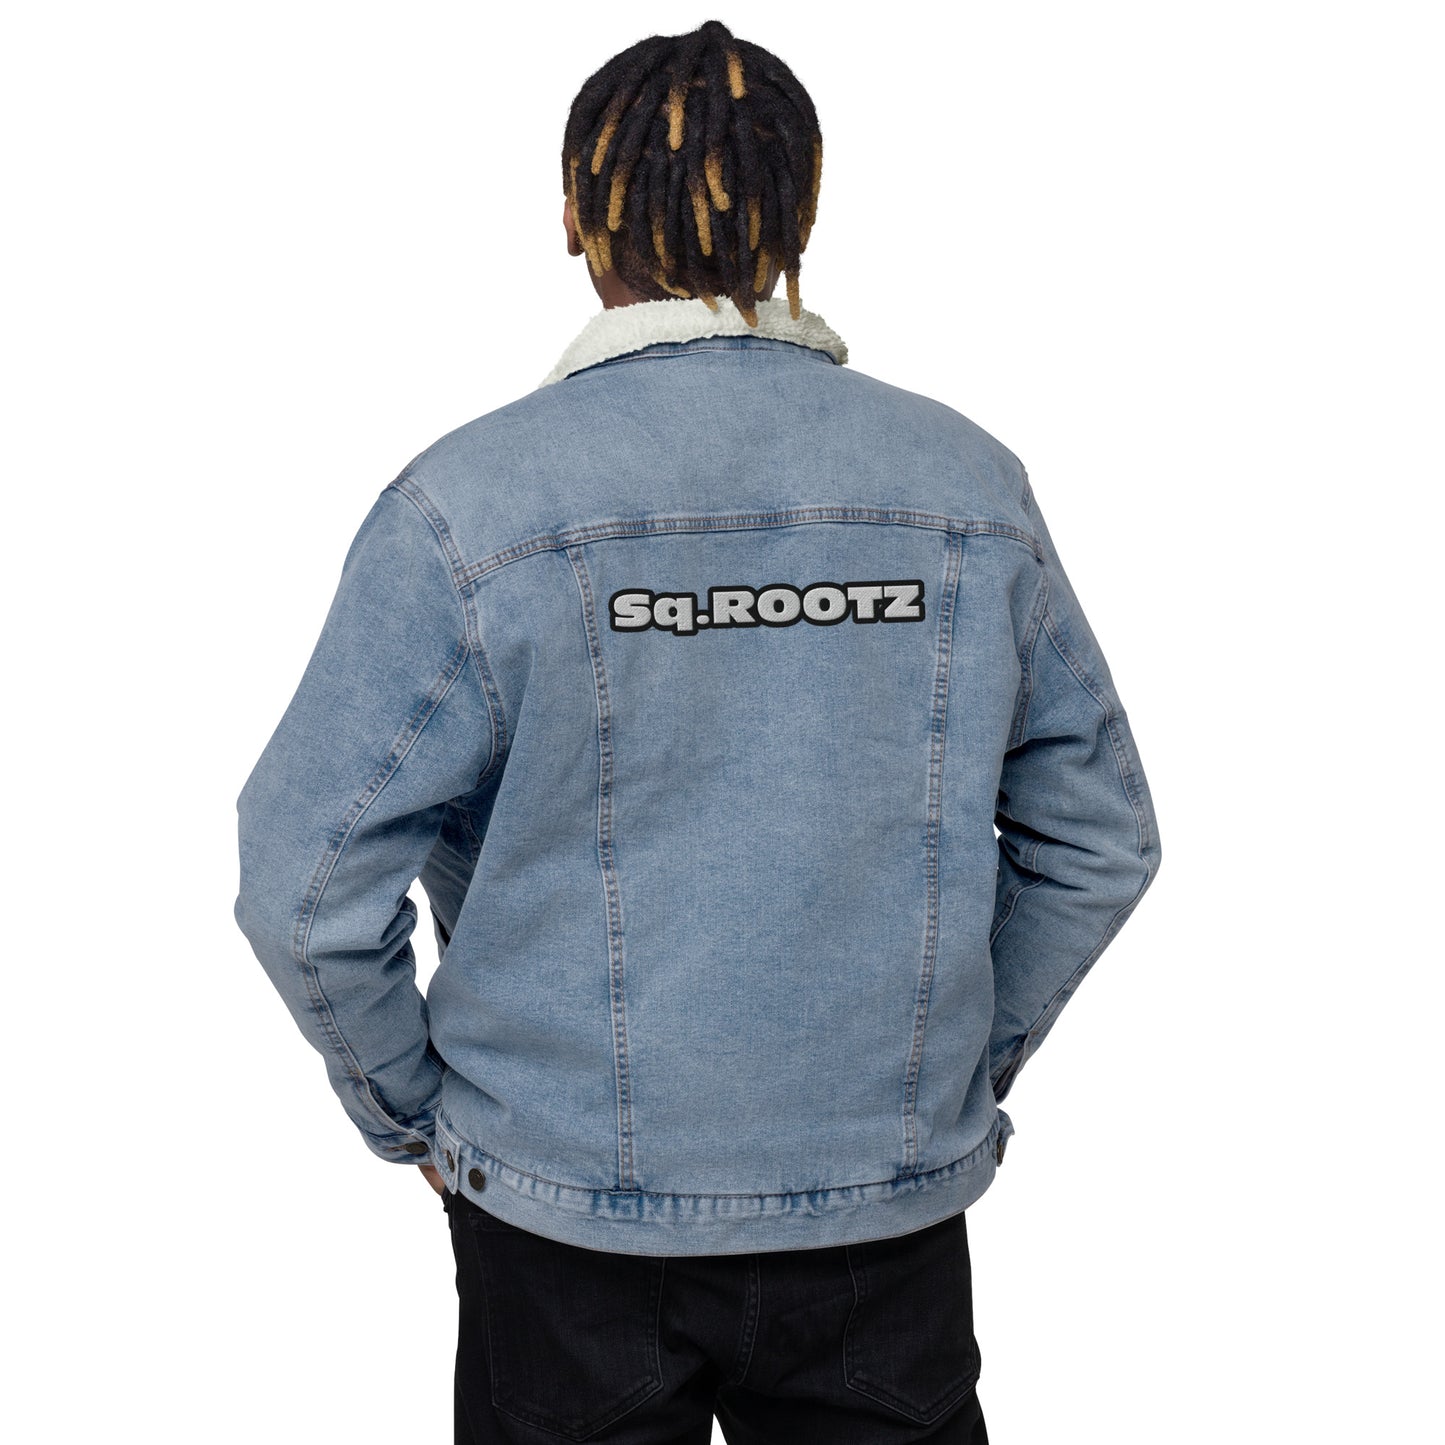 Sq.Rootz Embroidered Sherpa Jacket